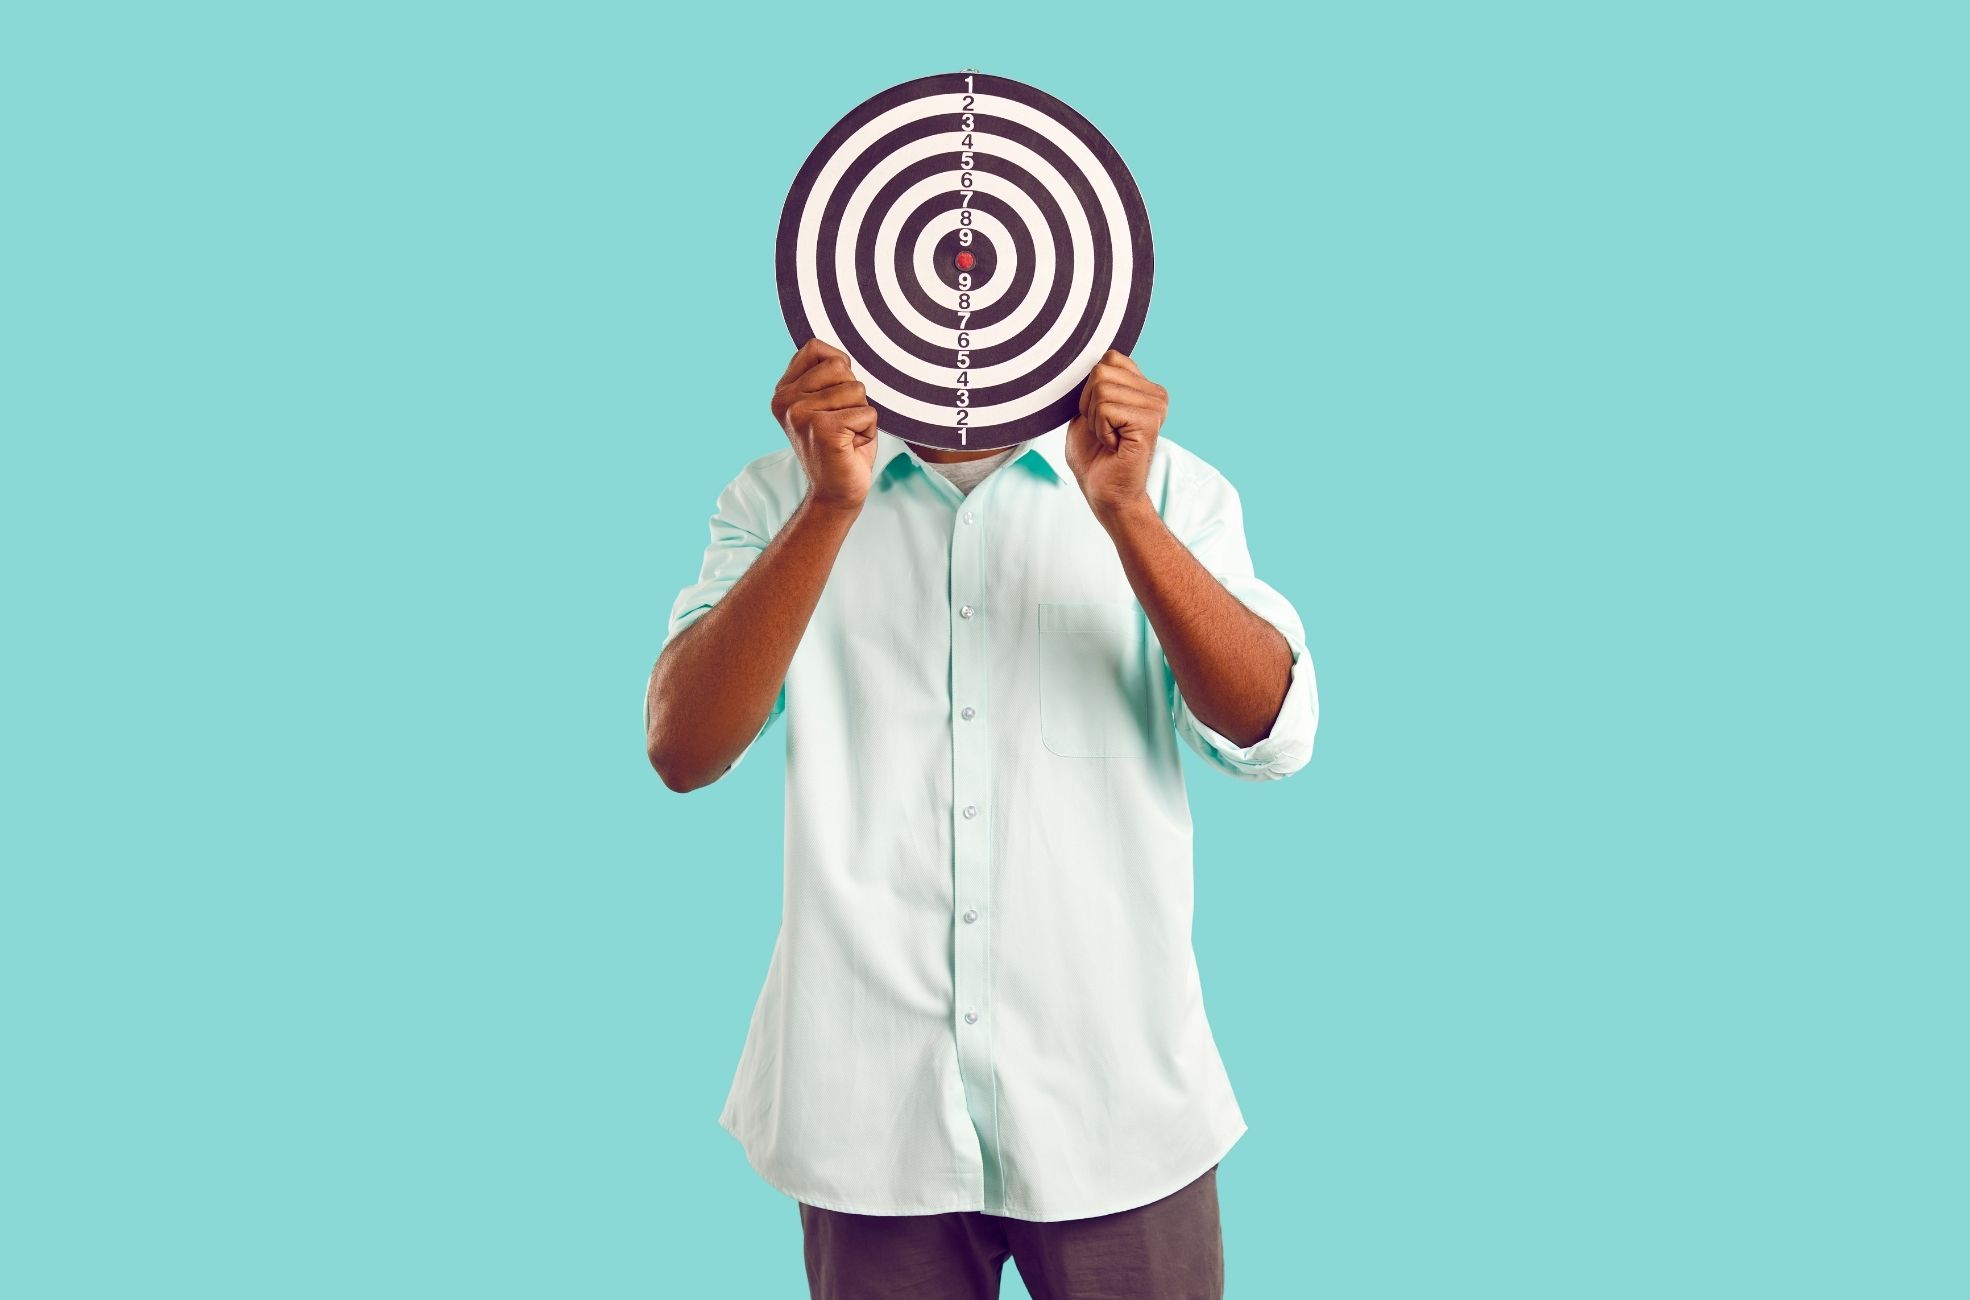 Man Holding Target Board Over Face